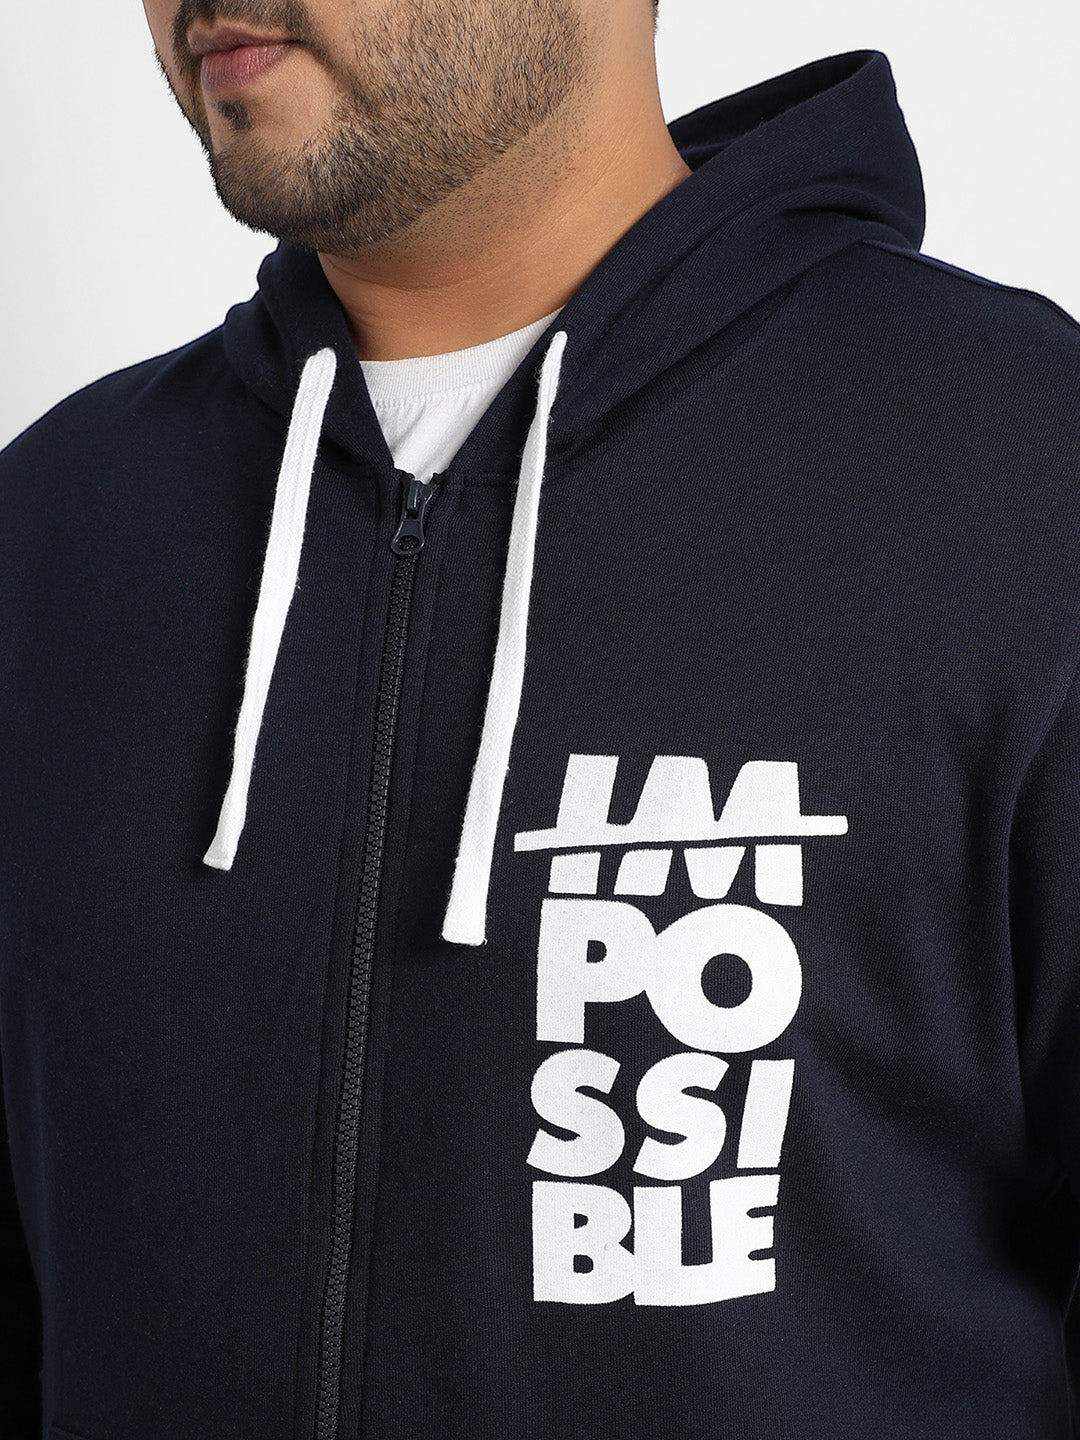 Plus Size Men's Navy Blue Zip-Front Impossible Hoodie With Contrast Drawstring